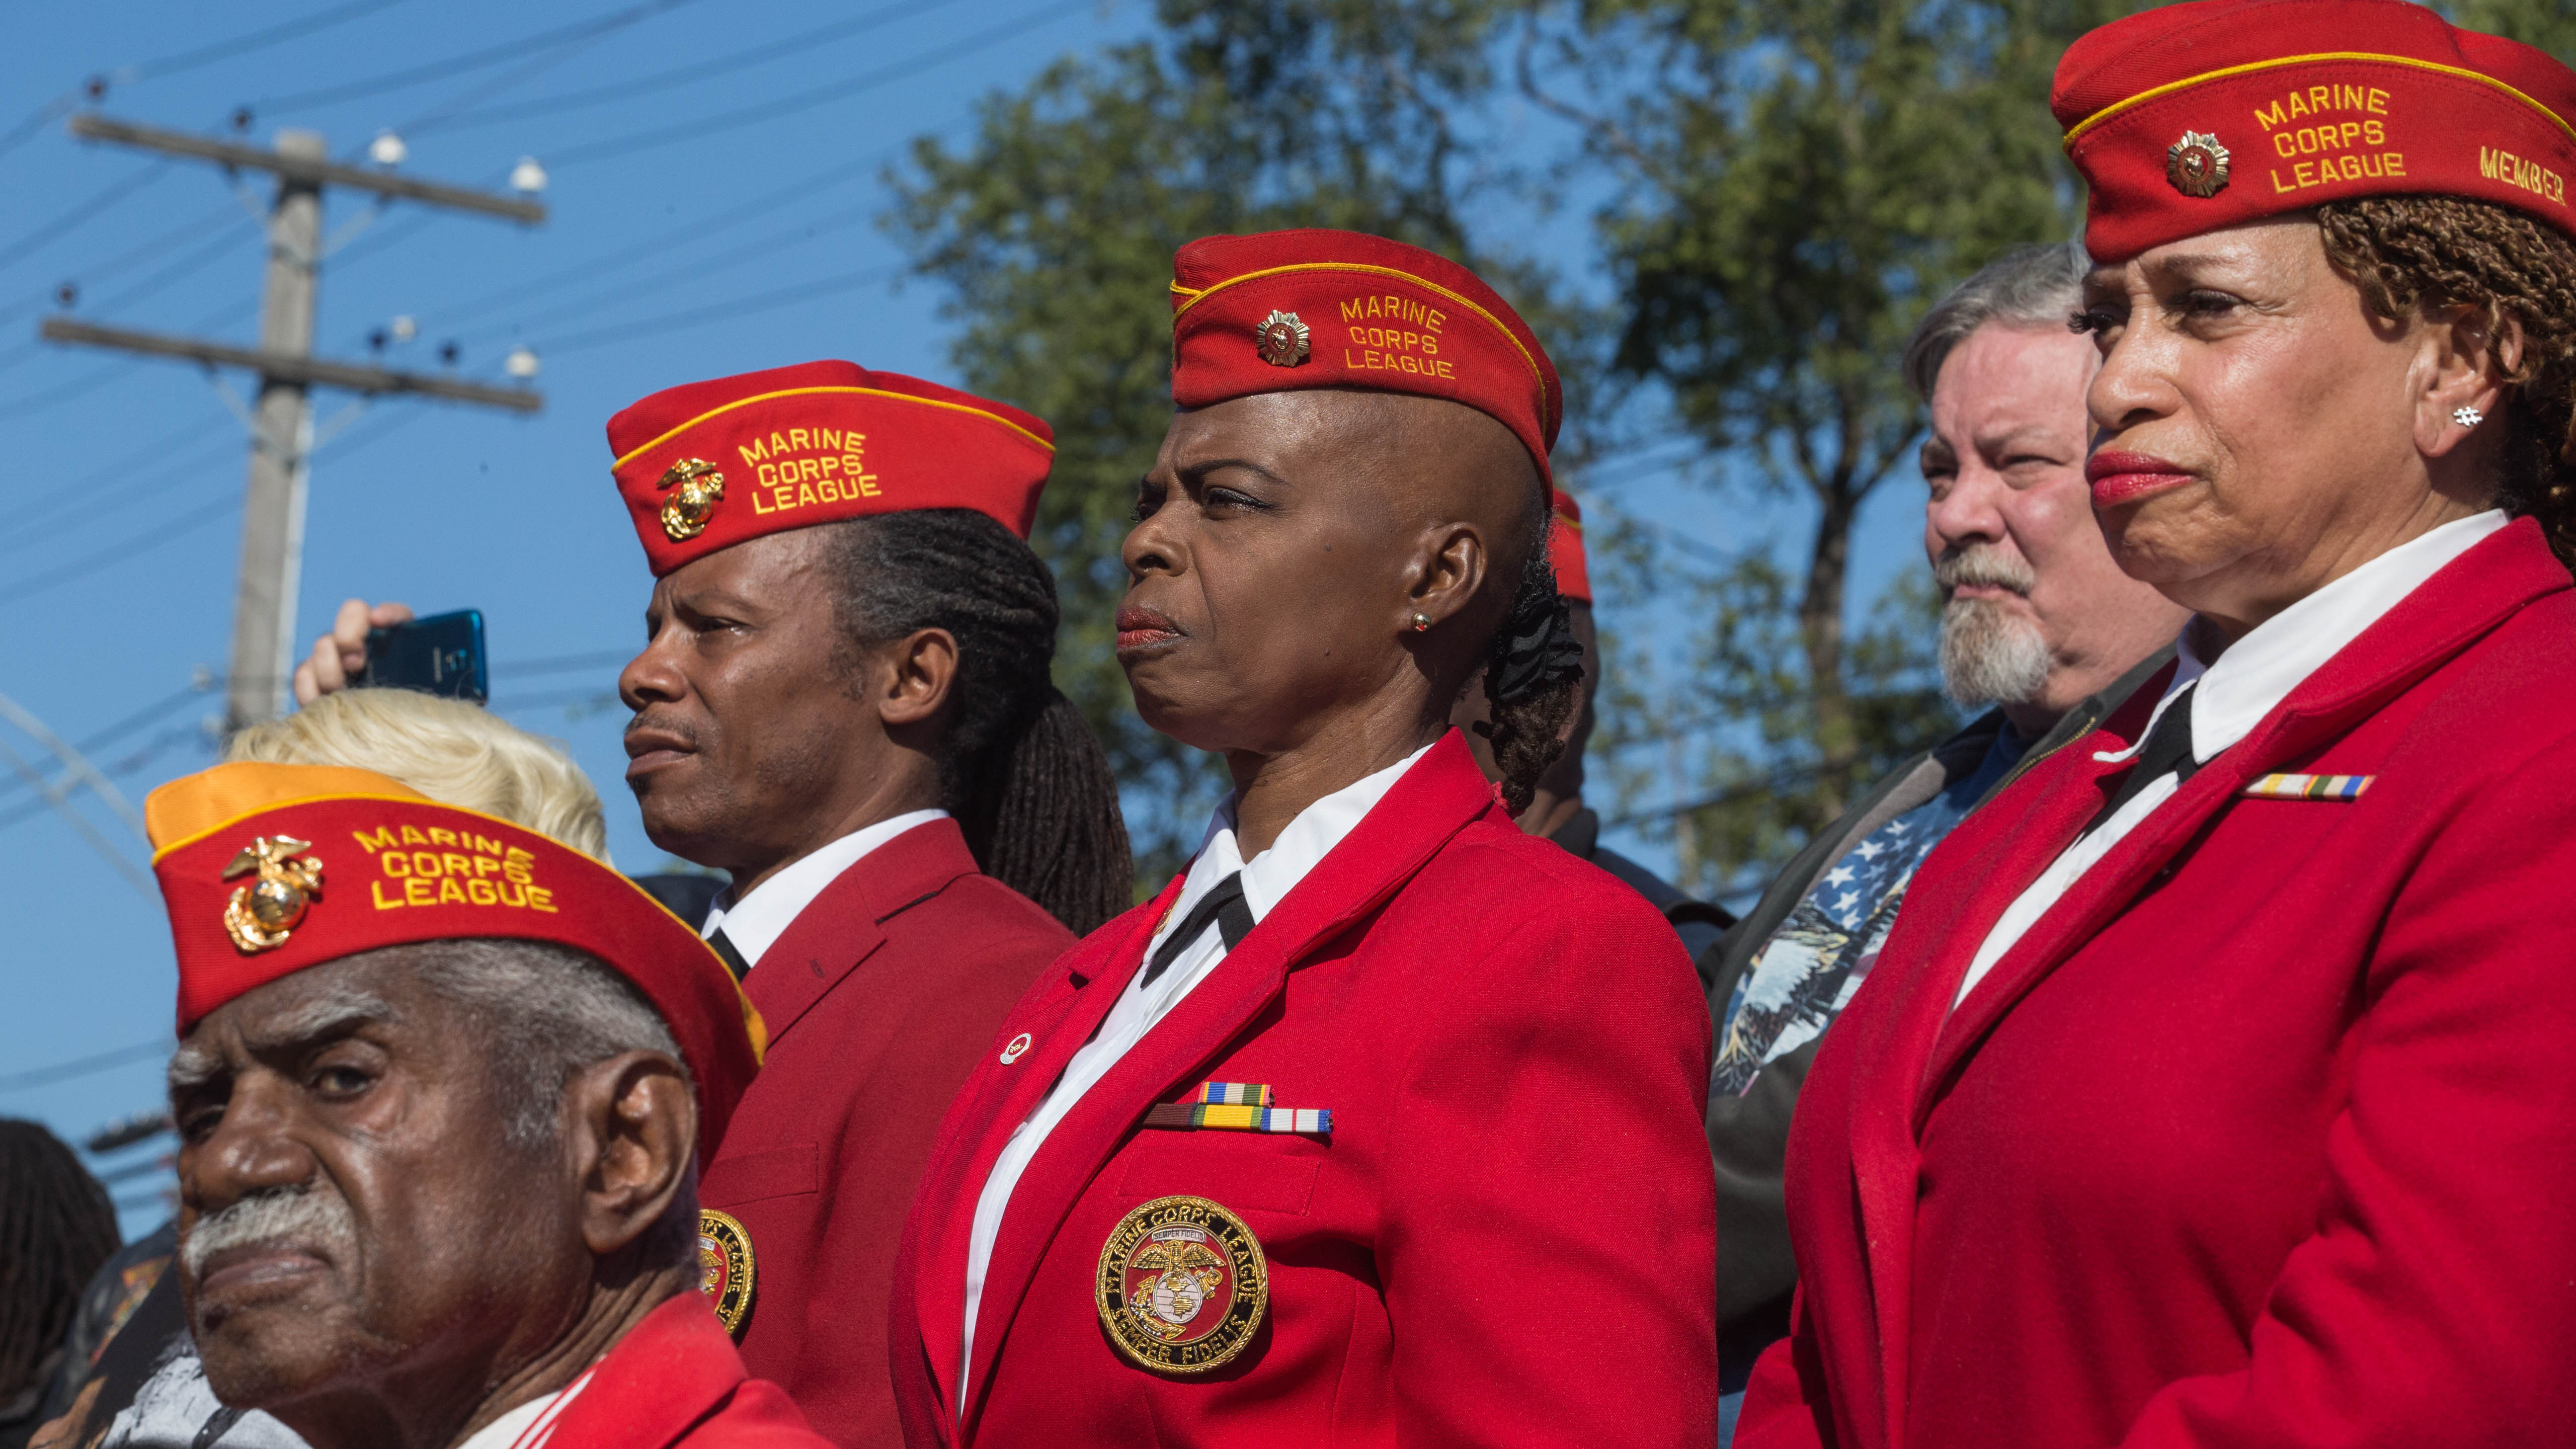 marine corps league national convention - ImageGallery